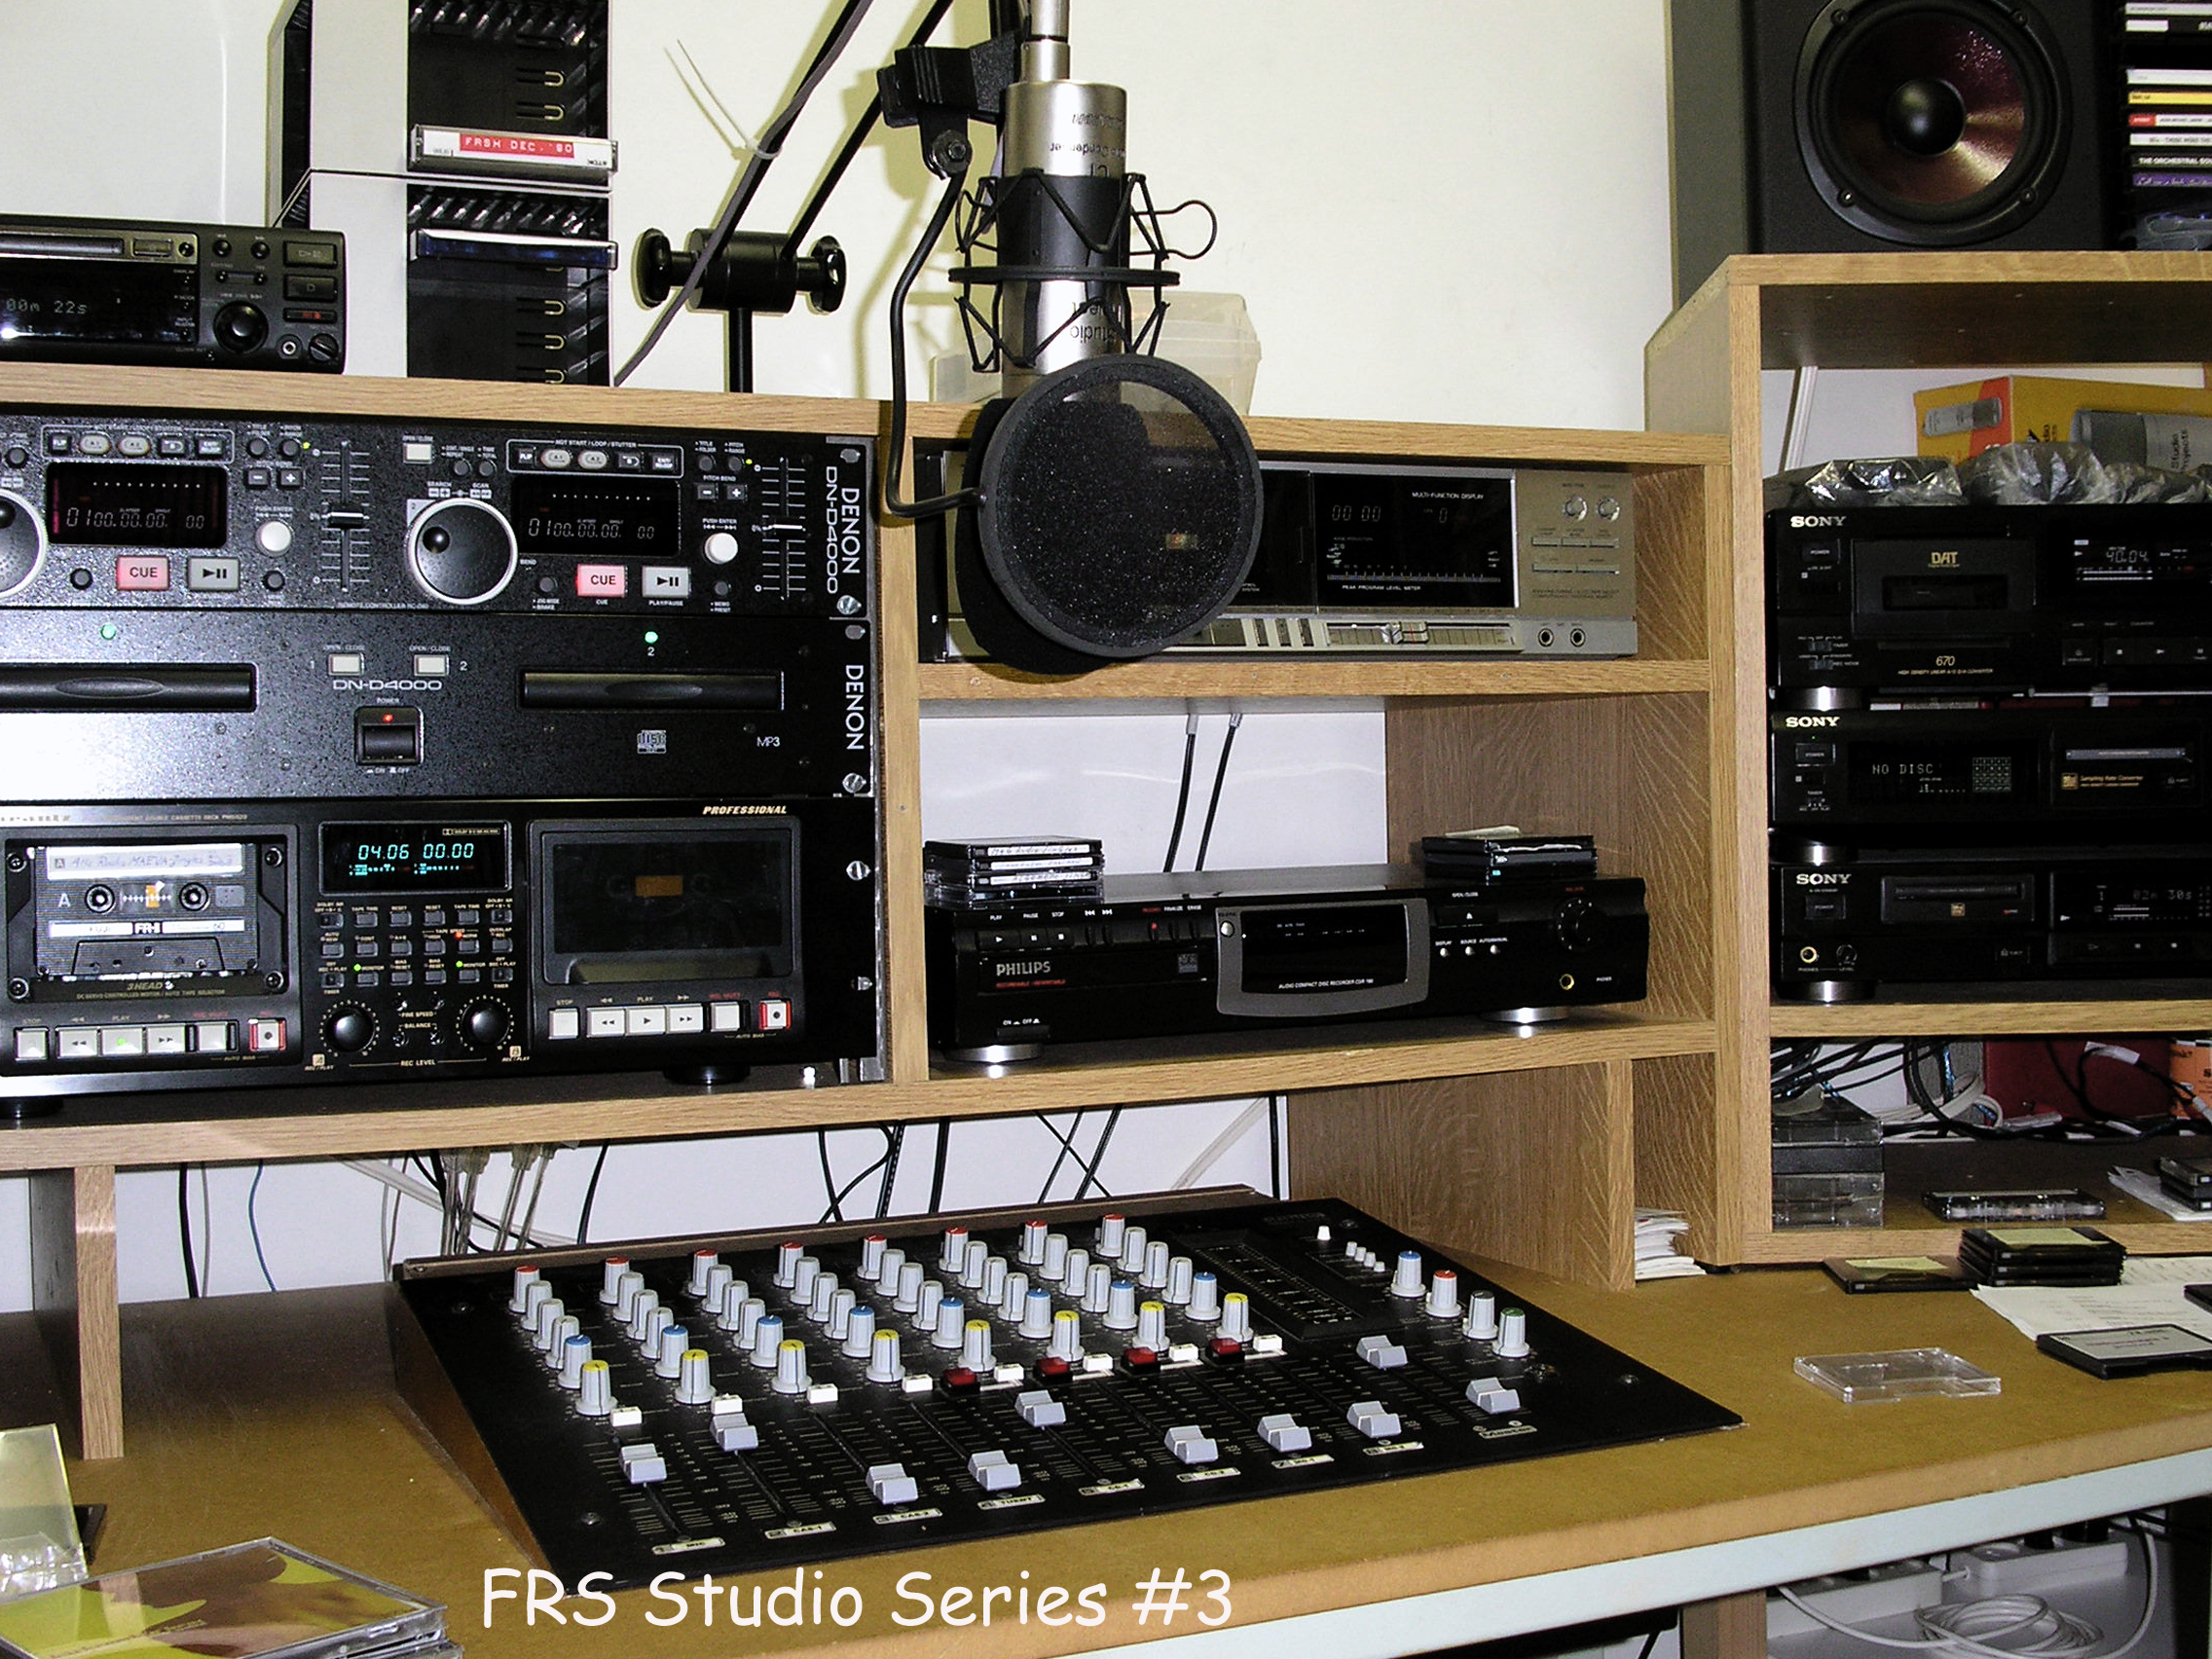 Front FRS Studio including Dateq mixer